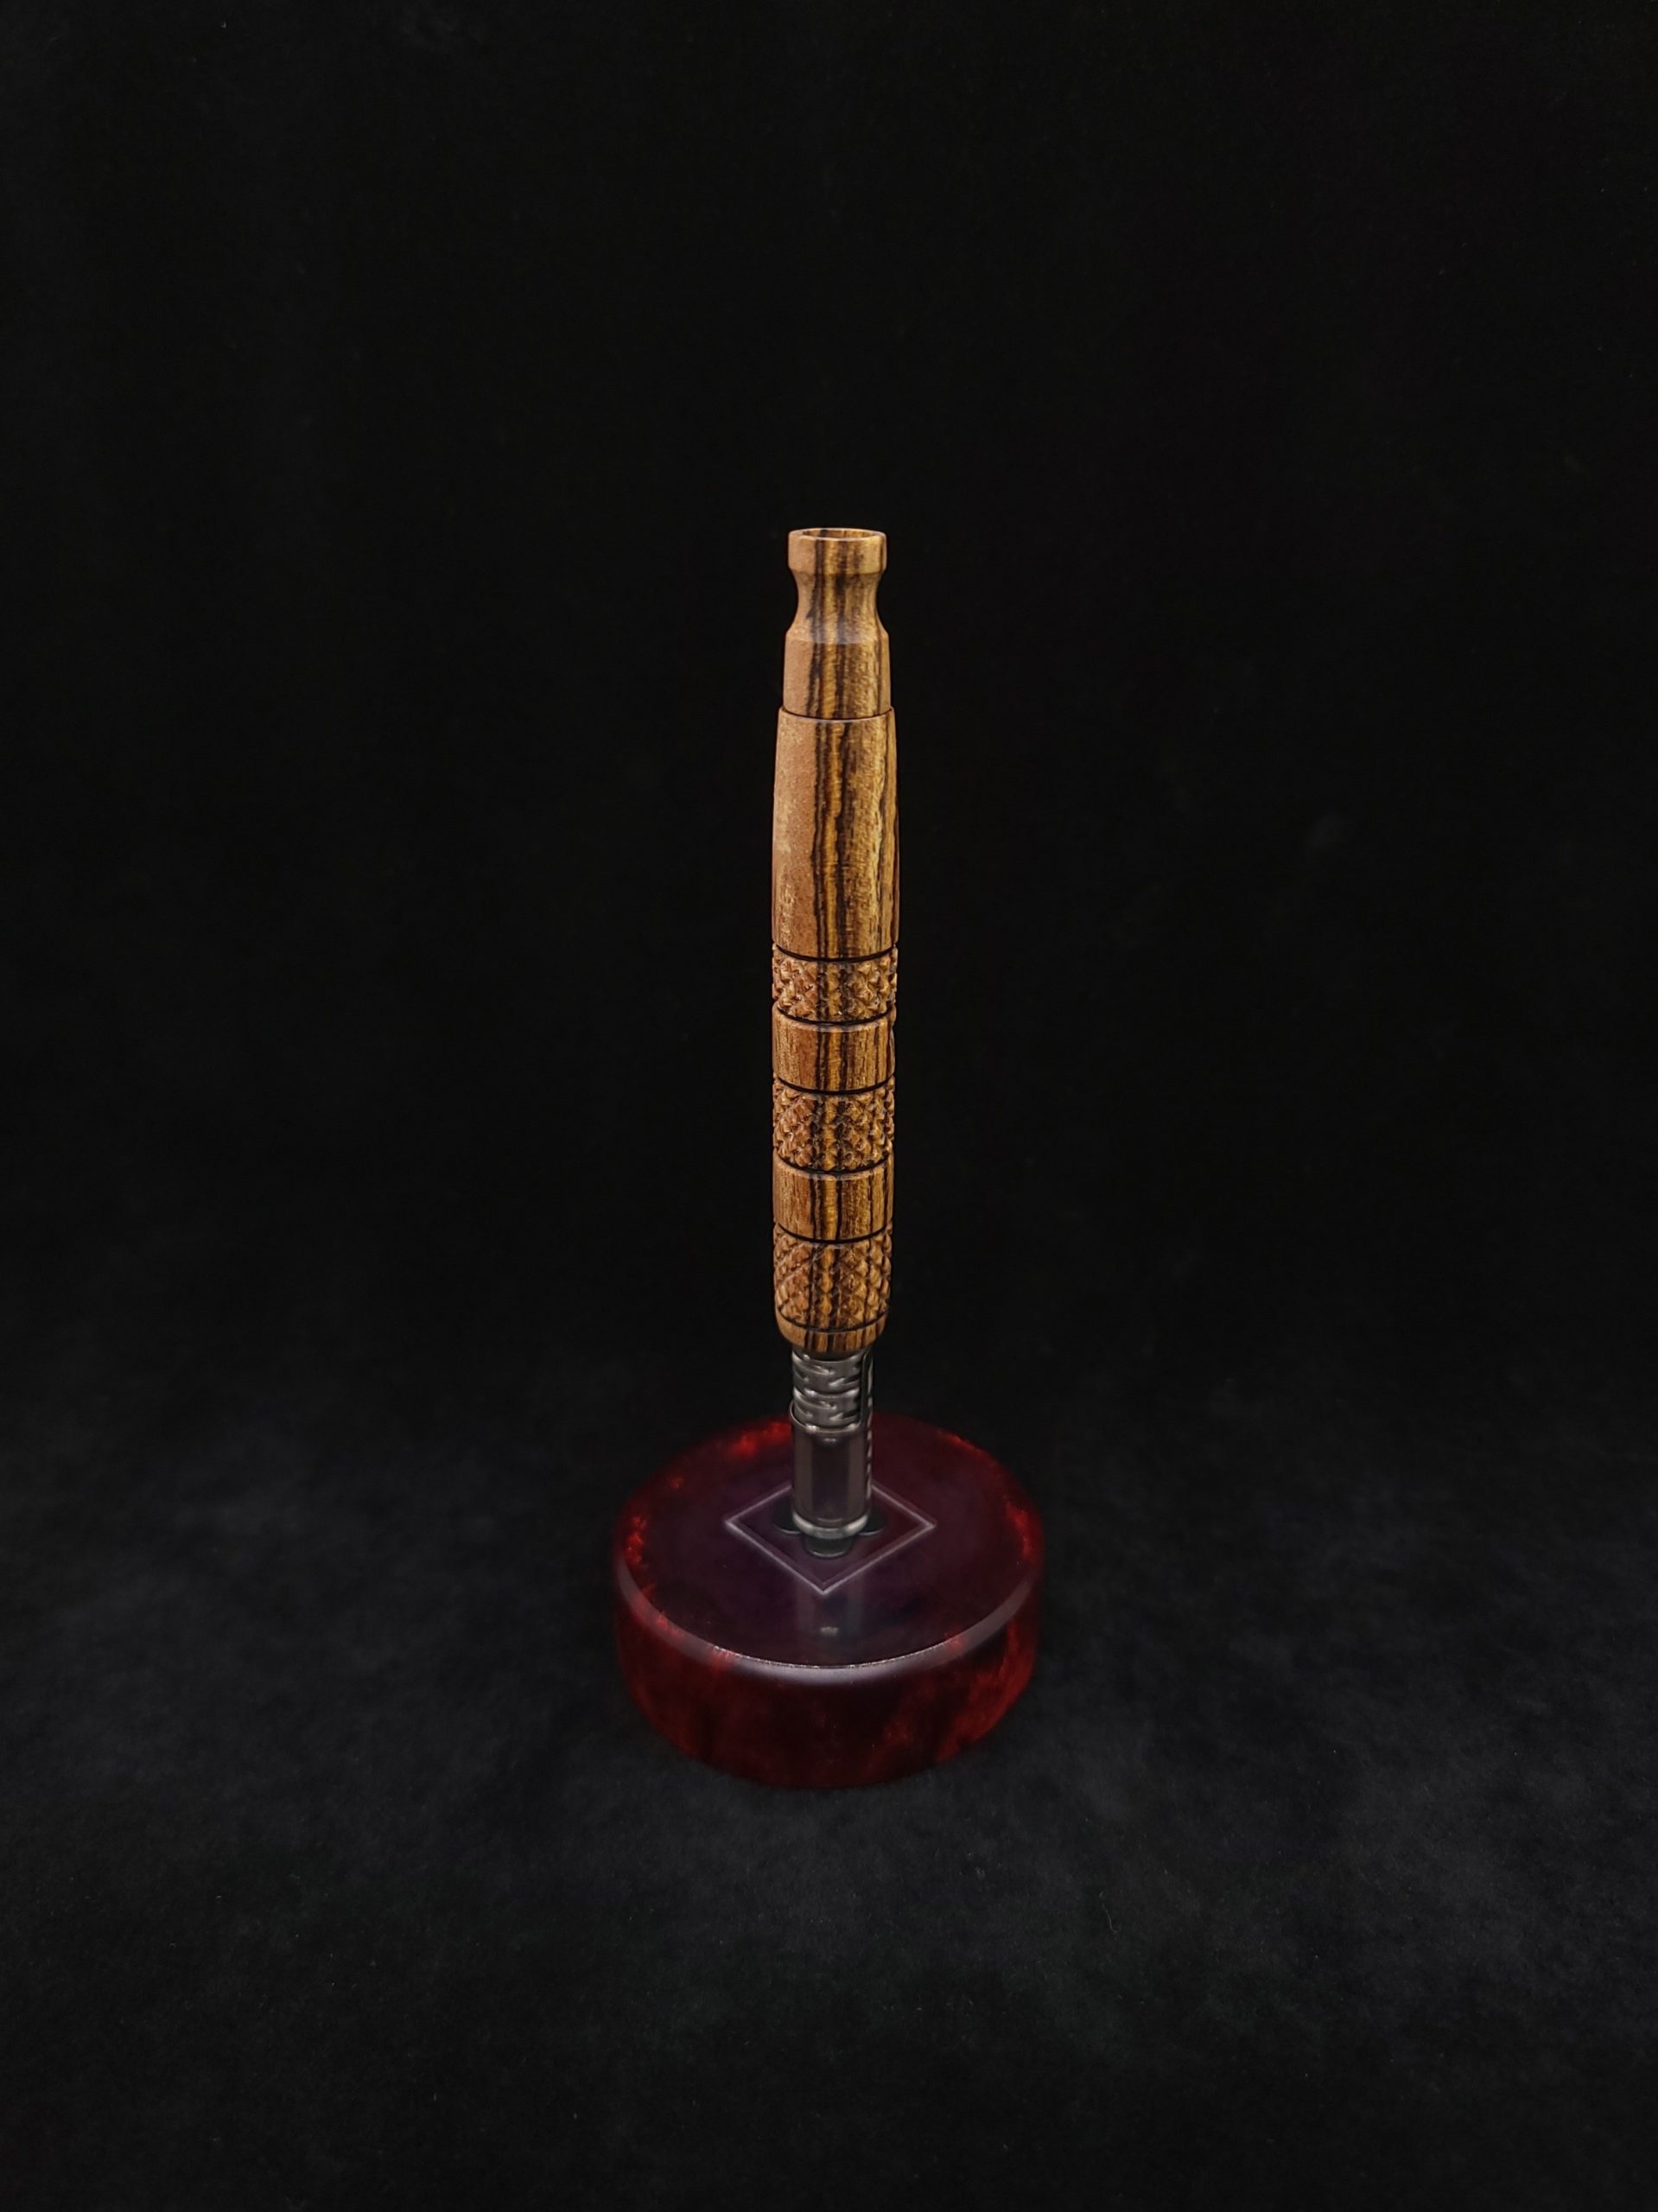 This image portrays High Class-Knurled XL Dynavap Stem/Bocote with Matching Mouthpiece by Dovetail Woodwork.